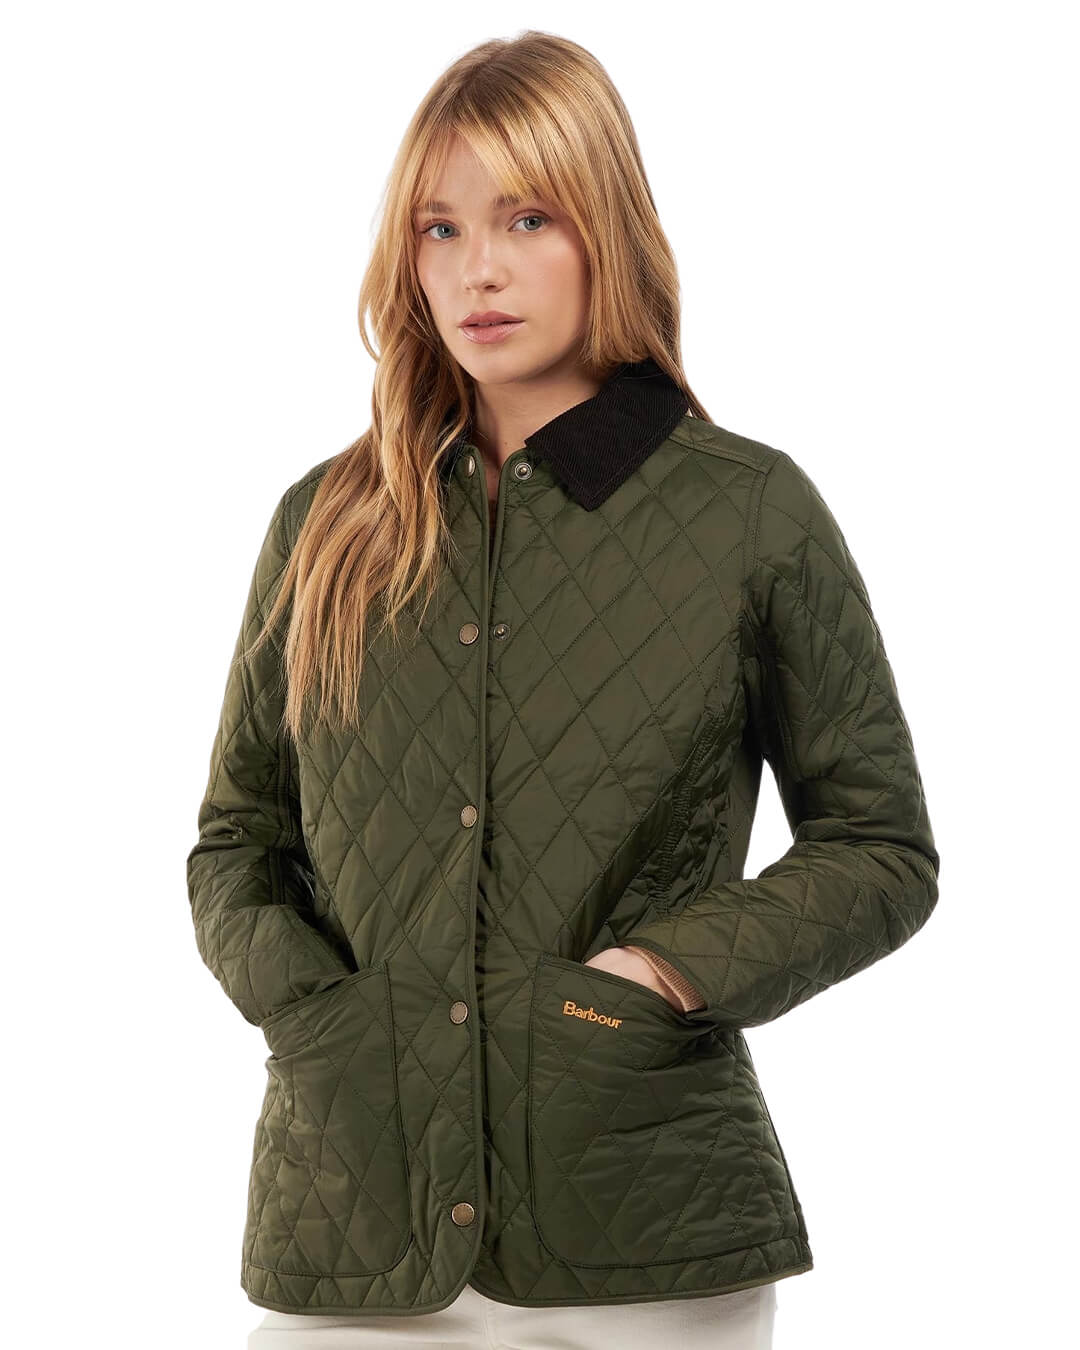 Barbour Outerwear Barbour Annandale Green Jacket